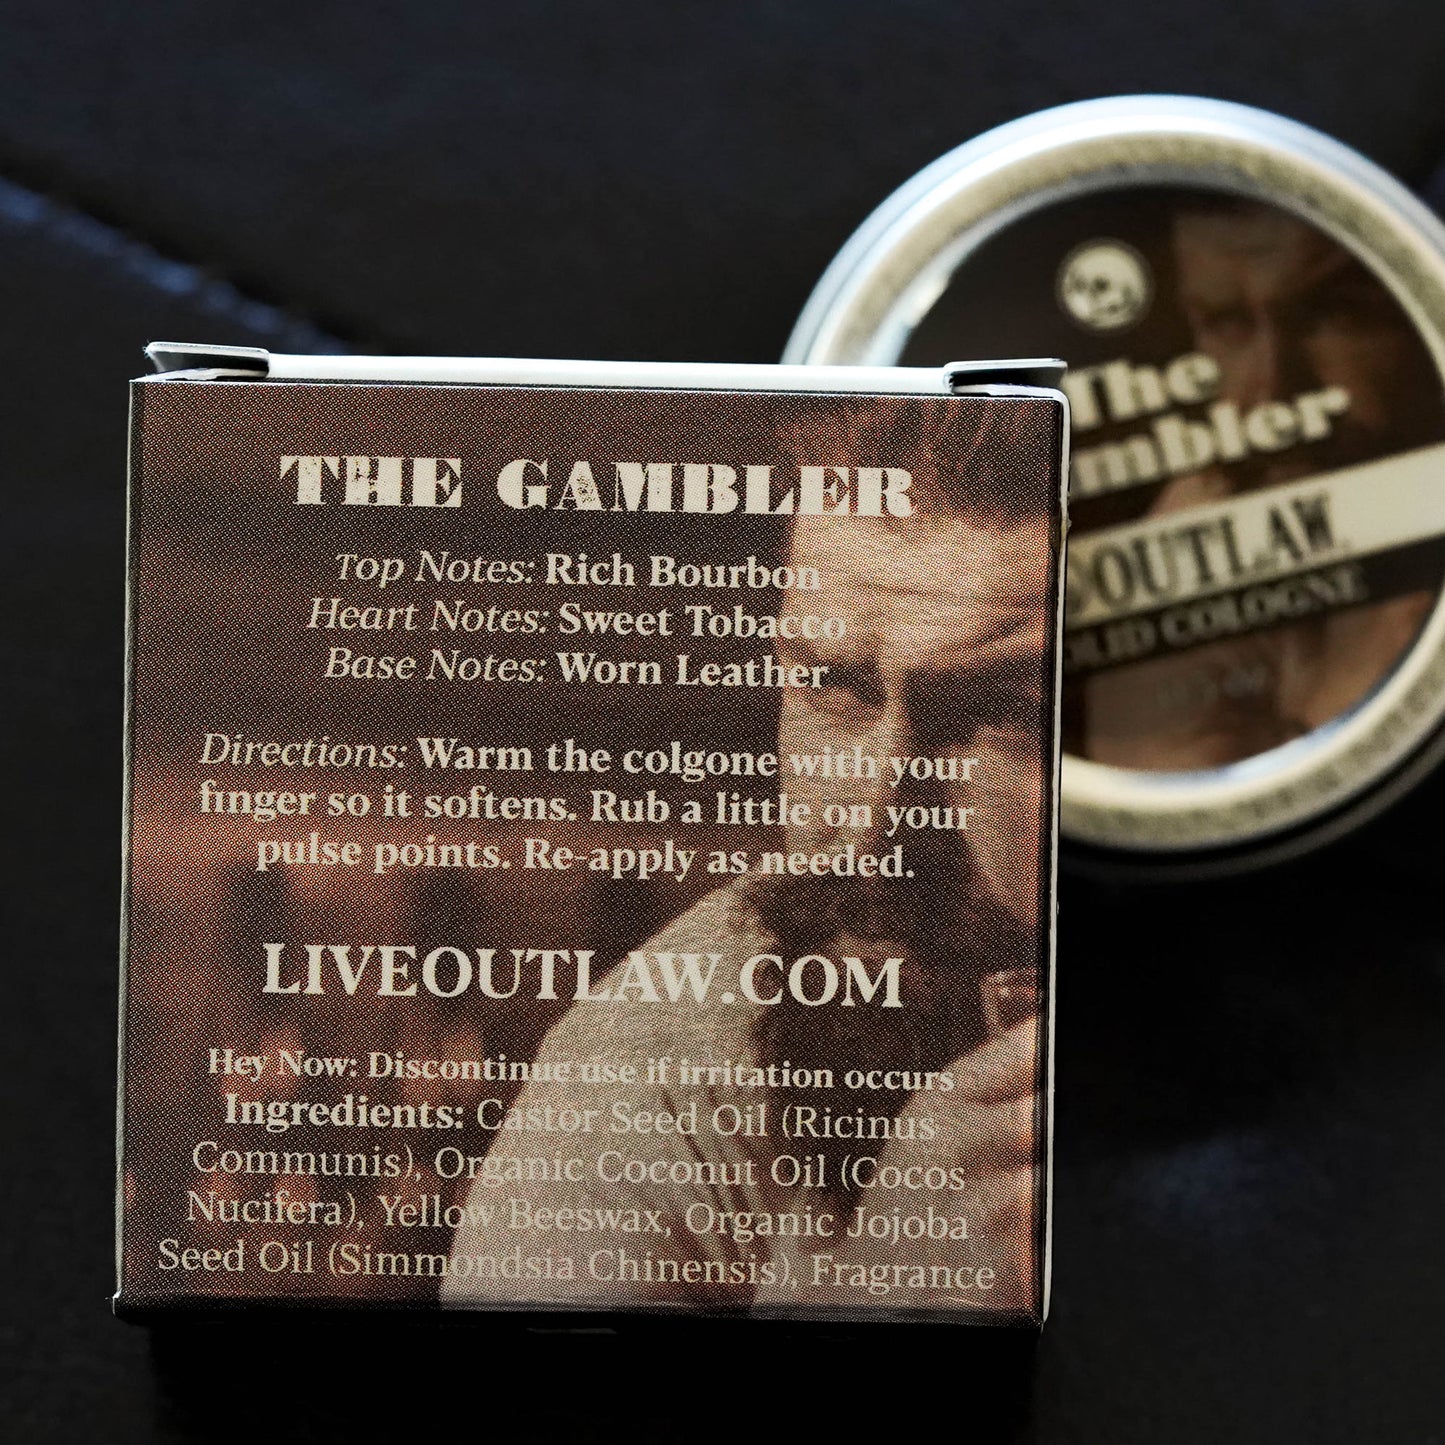 Bourbon Tobacco Solid Cologne for Men and Women, by Outlaw